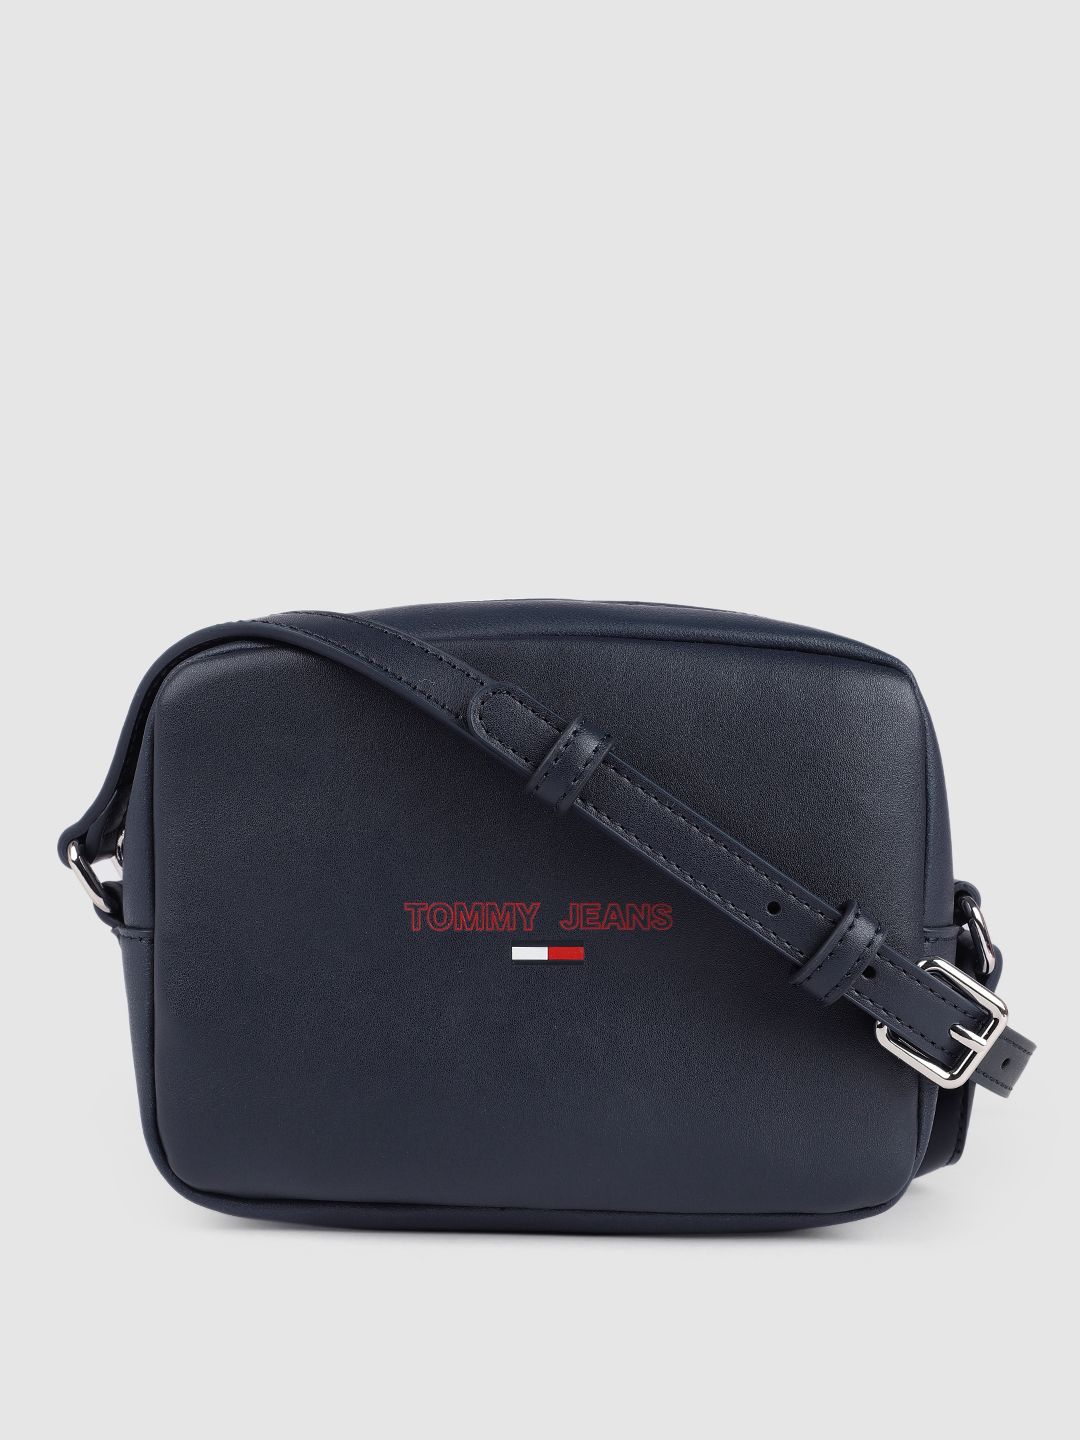 Tommy Hilfiger Navy Blue Solid Sling Bag Price in India